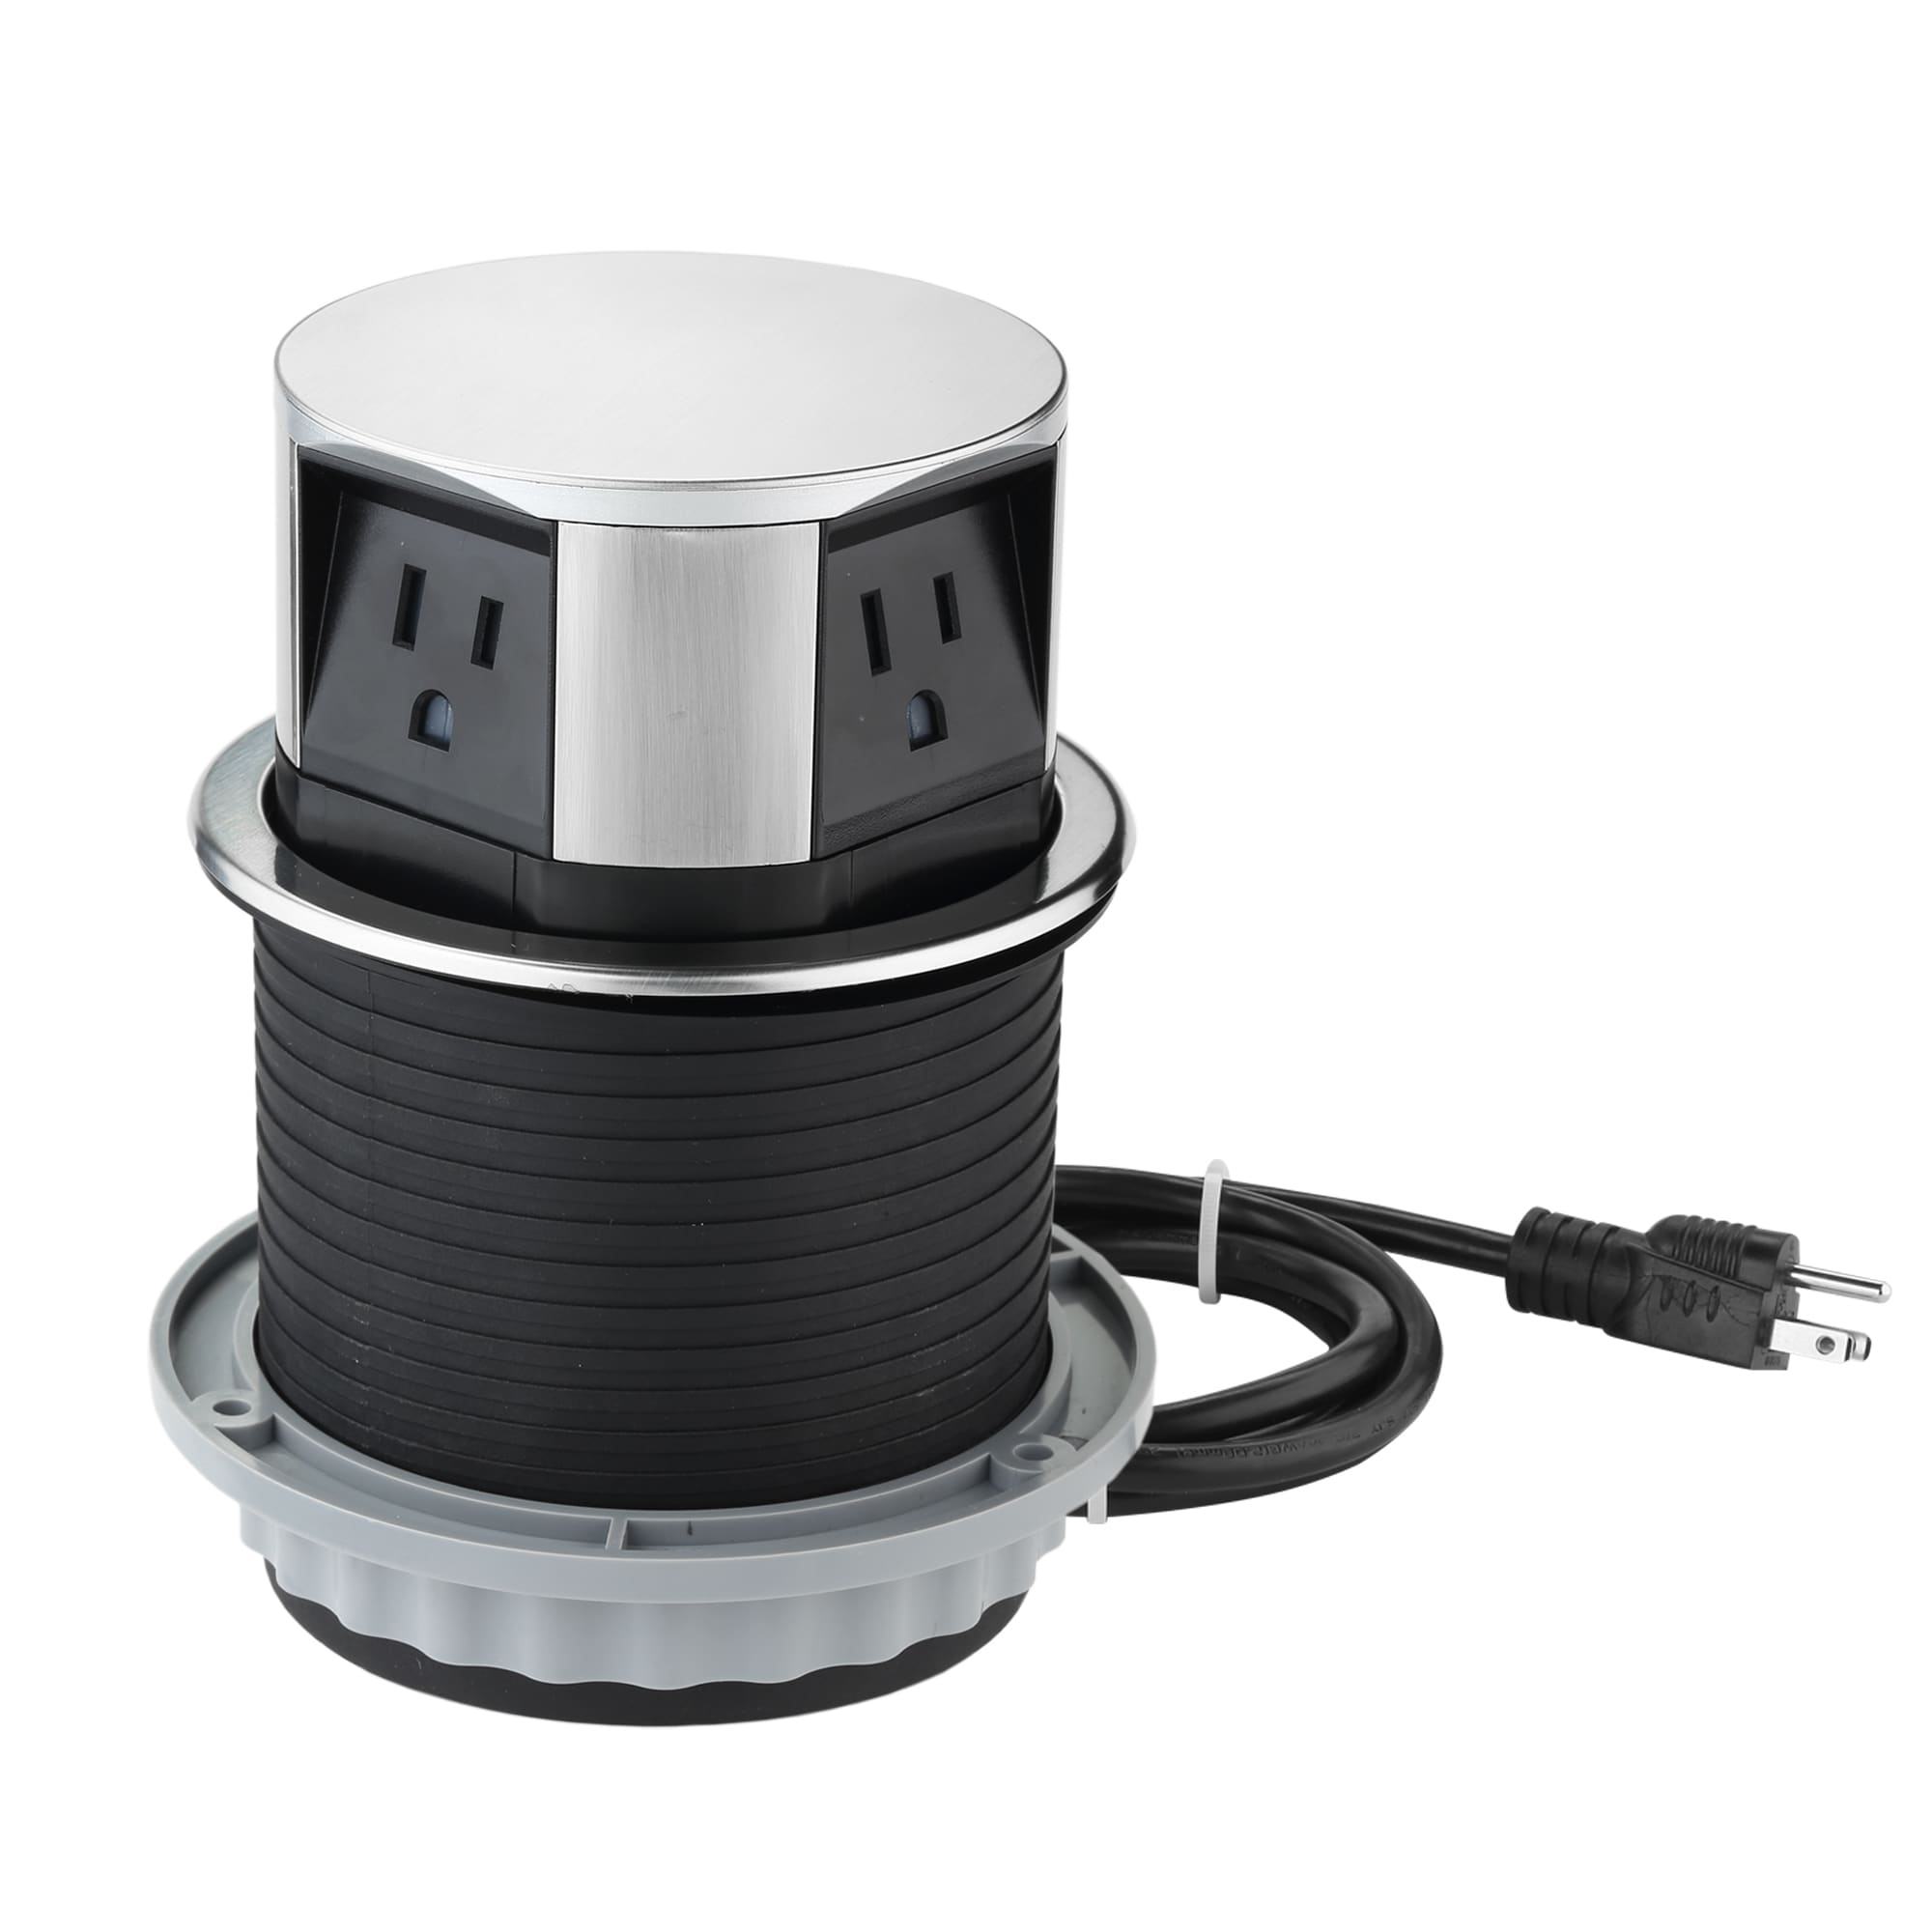 LINK2HOME 6-ft 3-Outlet 2-USB Ports Indoor Stainless Steel Power